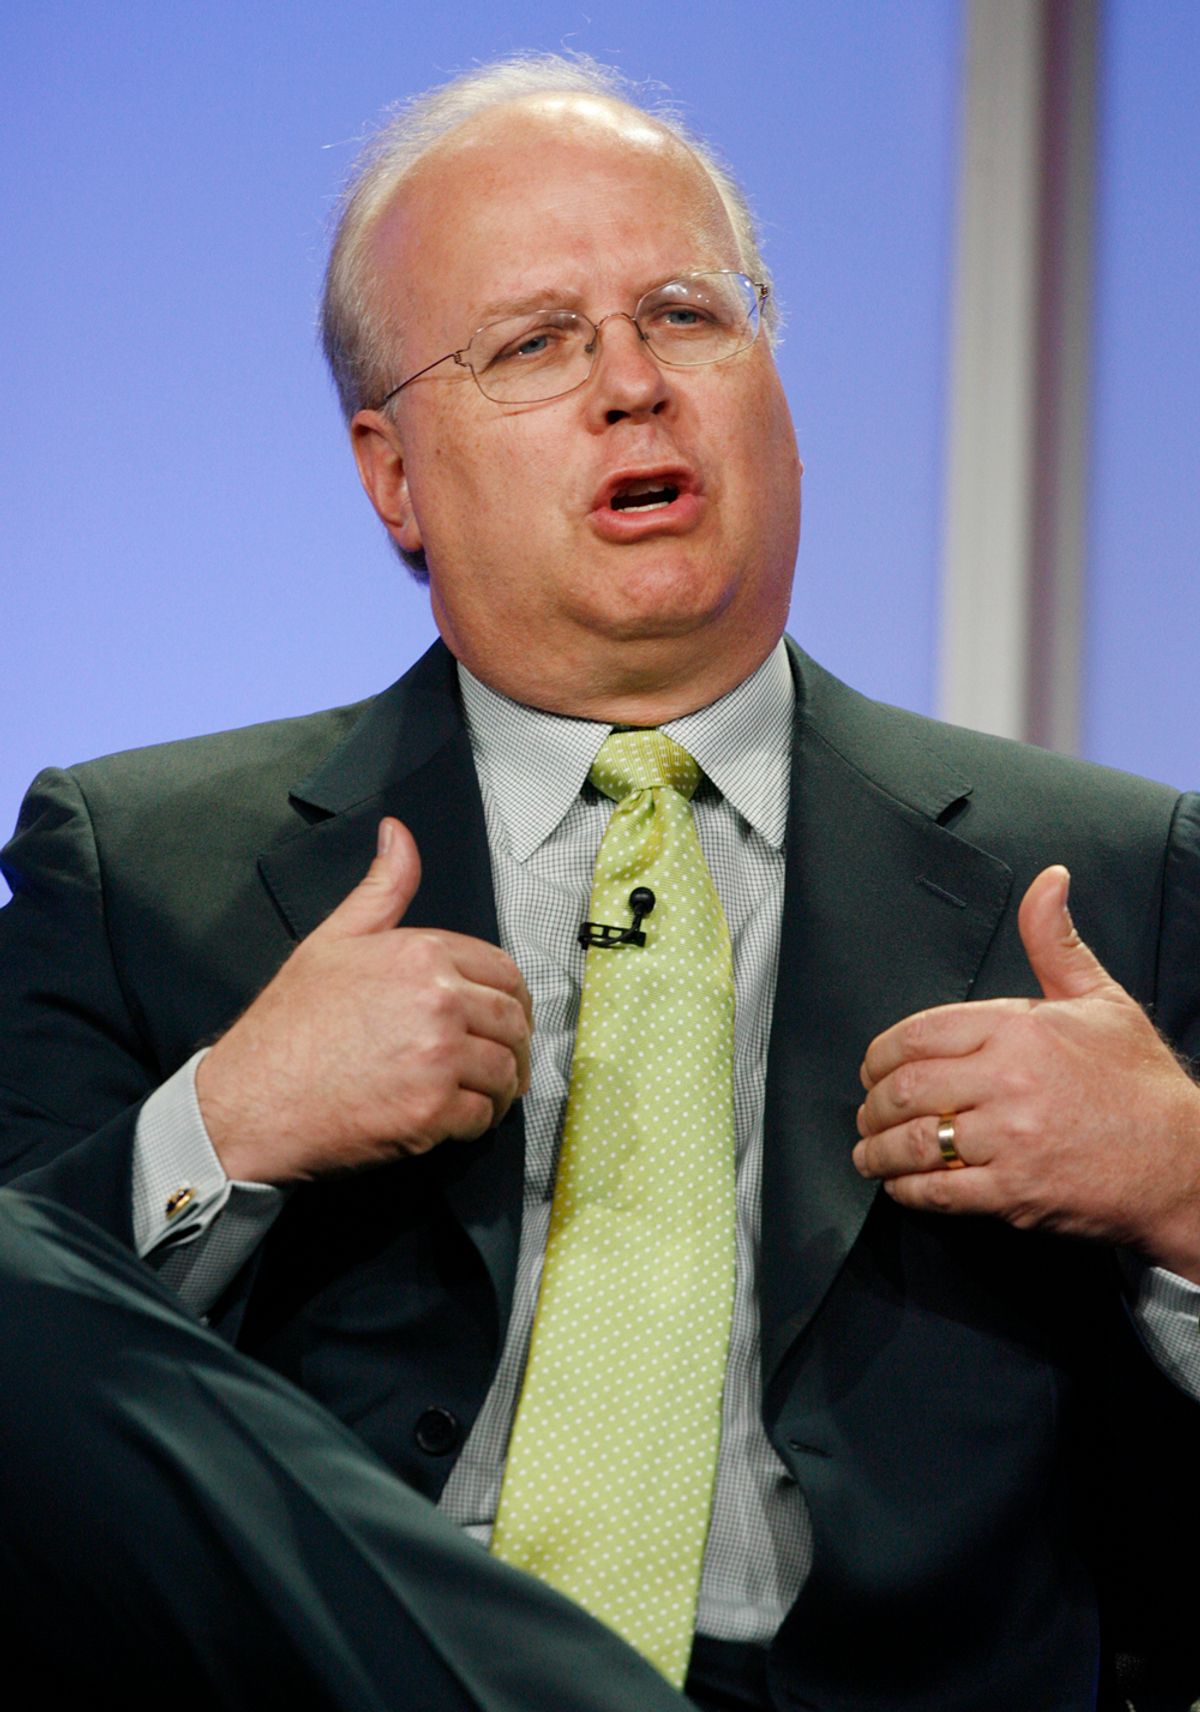 Karl Rove, contributor for Fox News takes part in a panel discussion at the Fox TV network summer press tour in Beverly Hills, California  July 14,2008. Rove previously was U.S. President George Bush's closest aide and political advisor.   REUTERS/Fred Prouser  (UNITED STATES) (Â© Fred Prouser / Reuters)